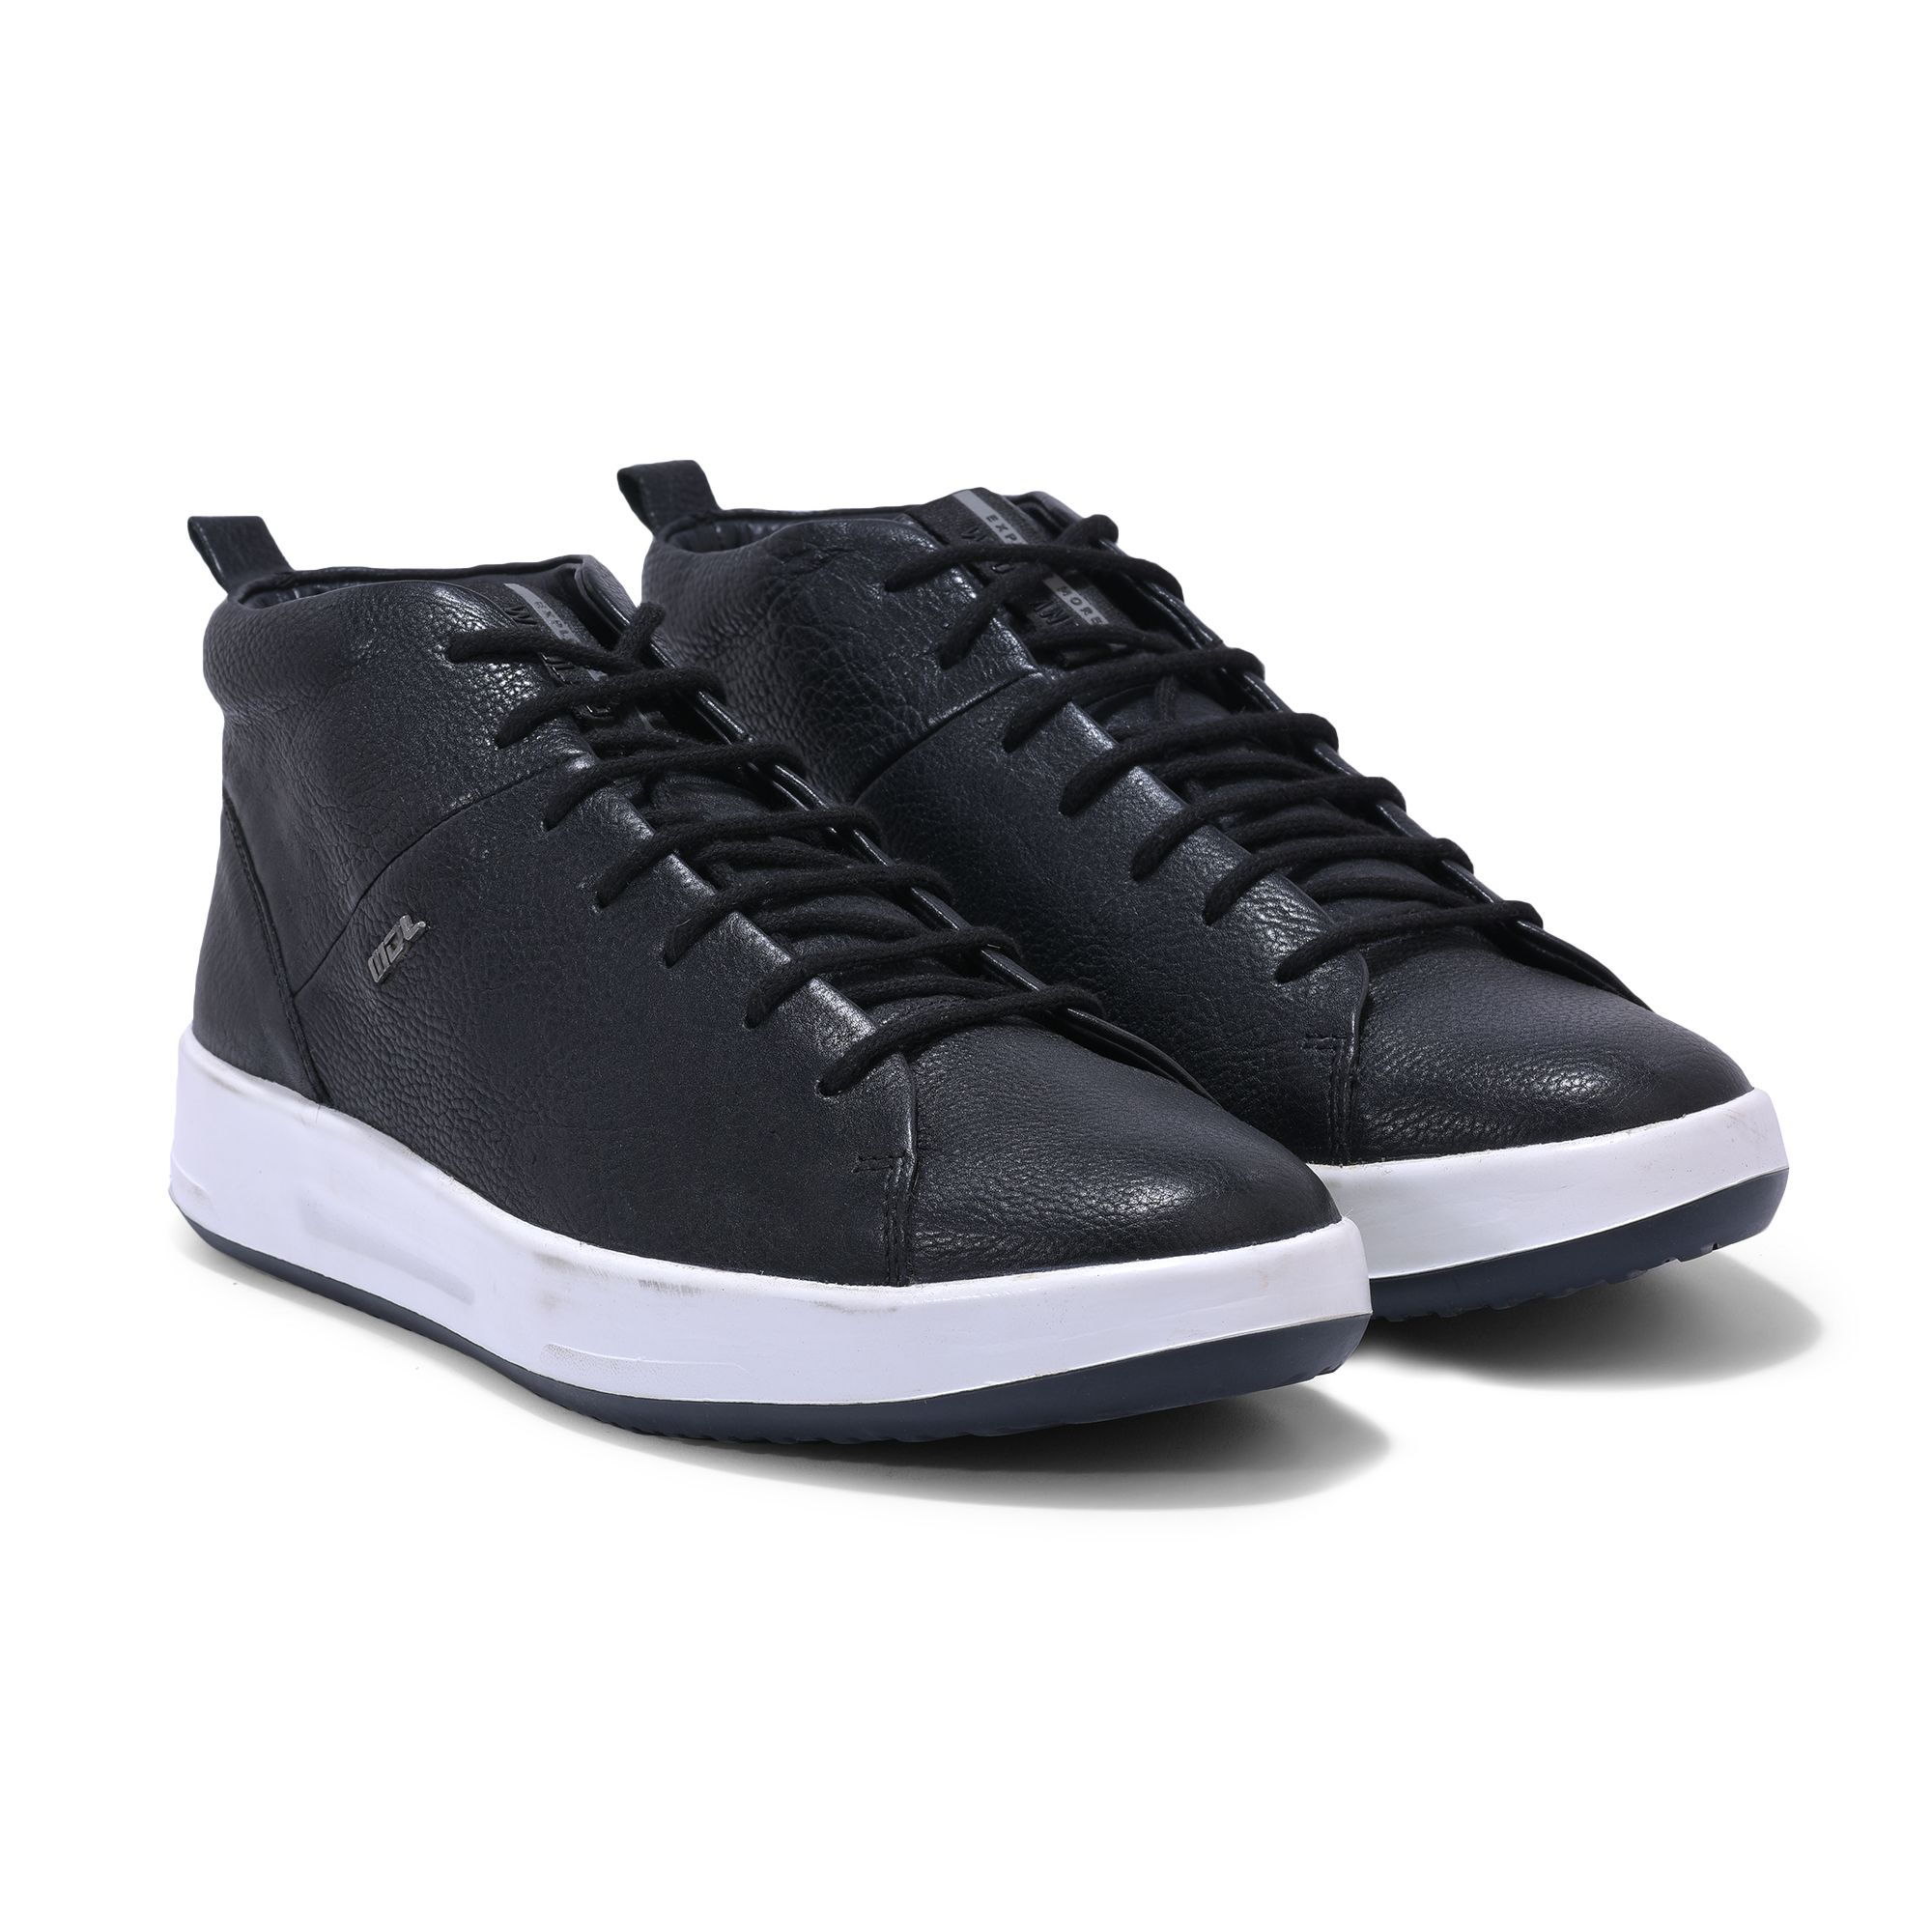 Woodland Black Casual Sneakers for Men